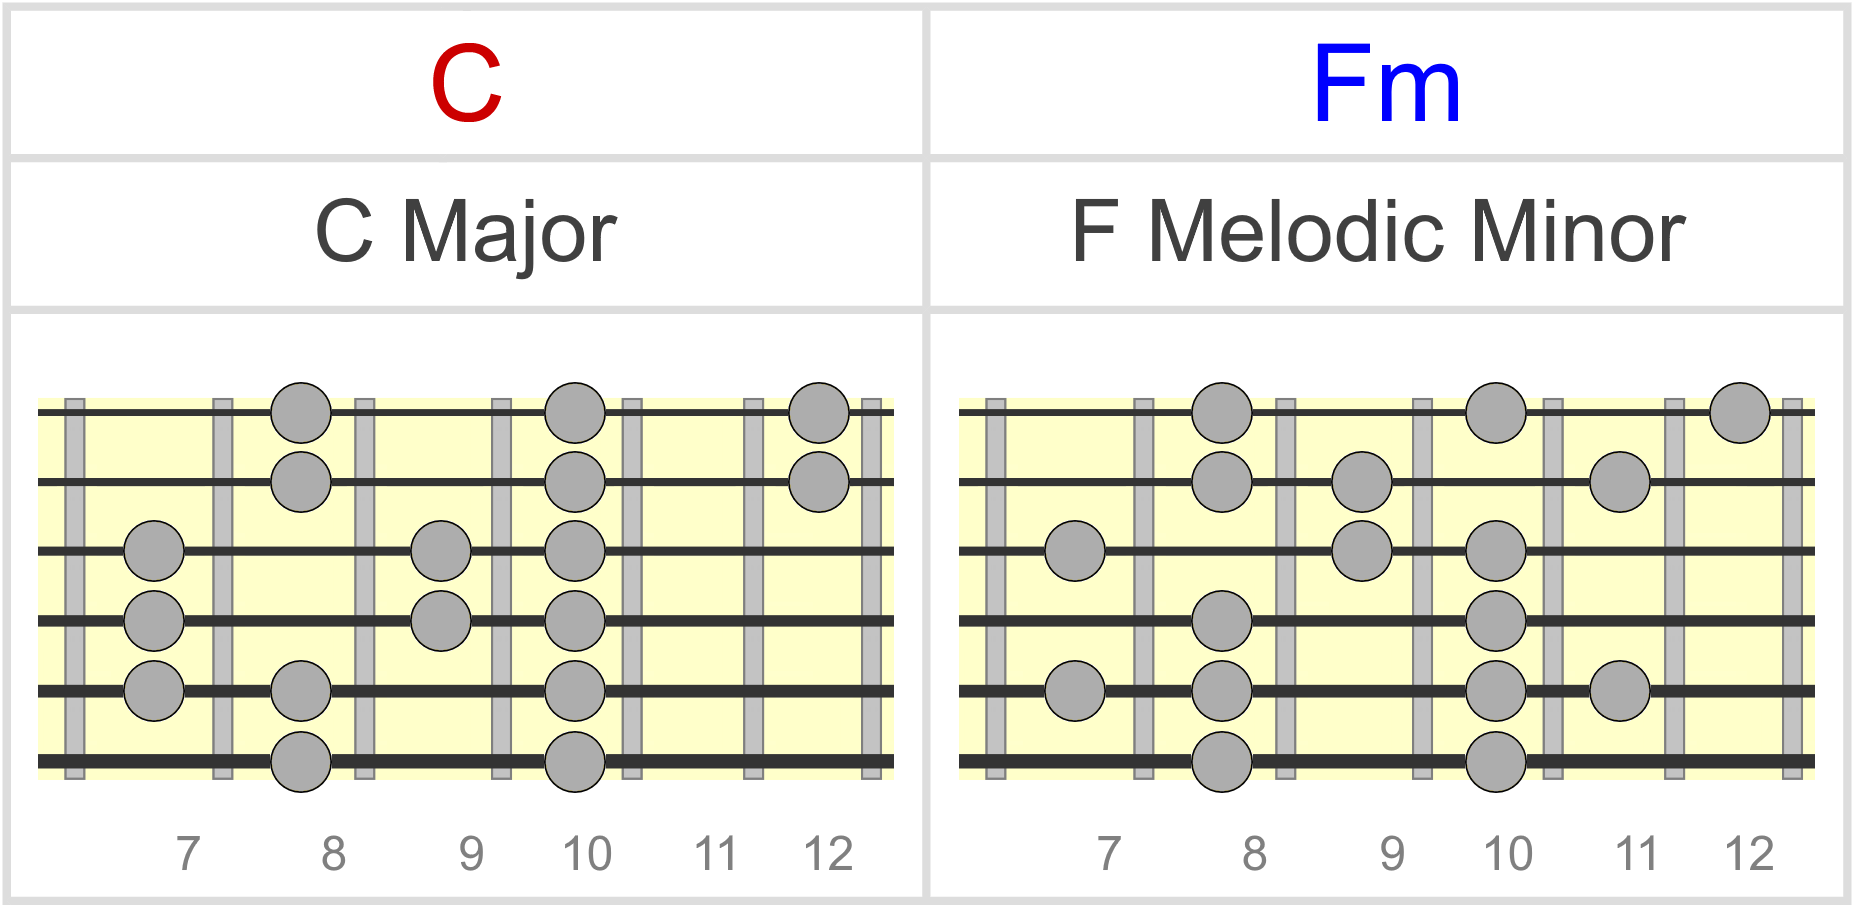 Melodic Minor Scale On Guitar Everything You Need To Know